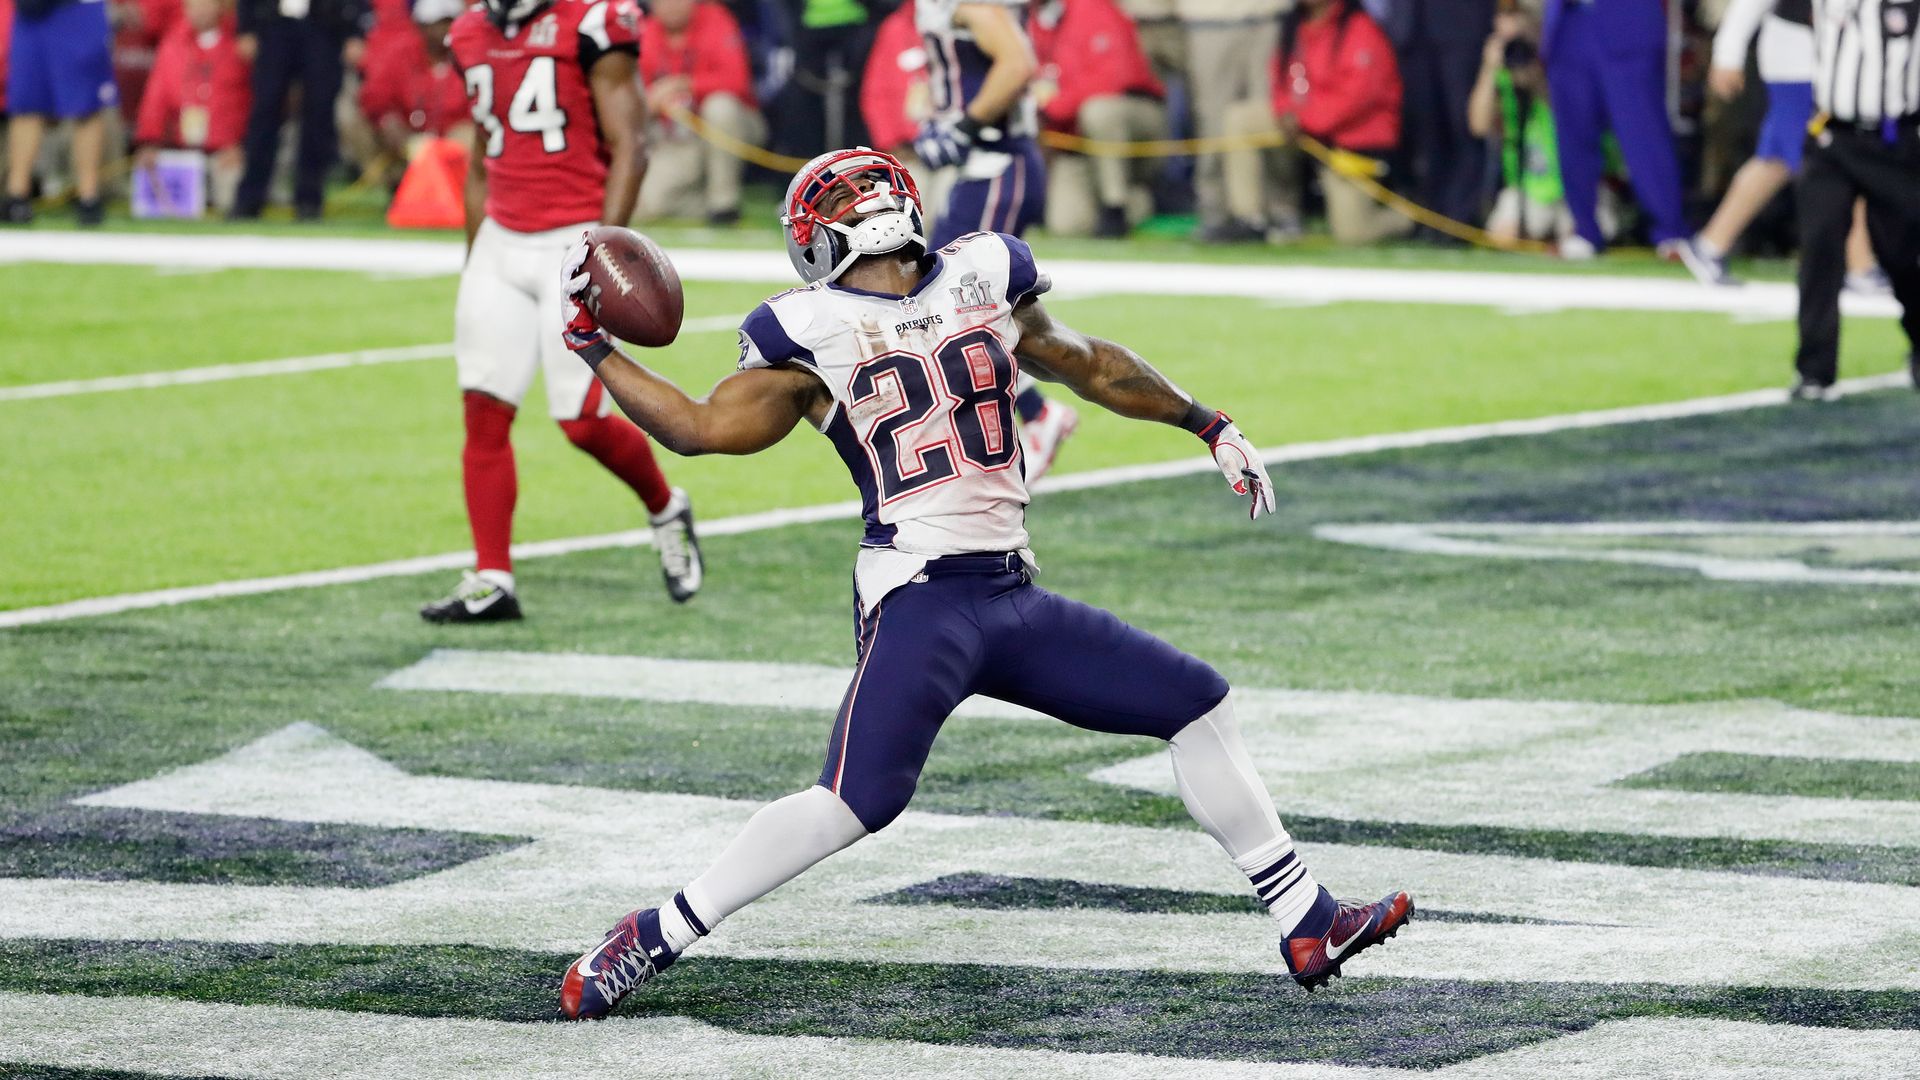 james white spiking the ball after a td